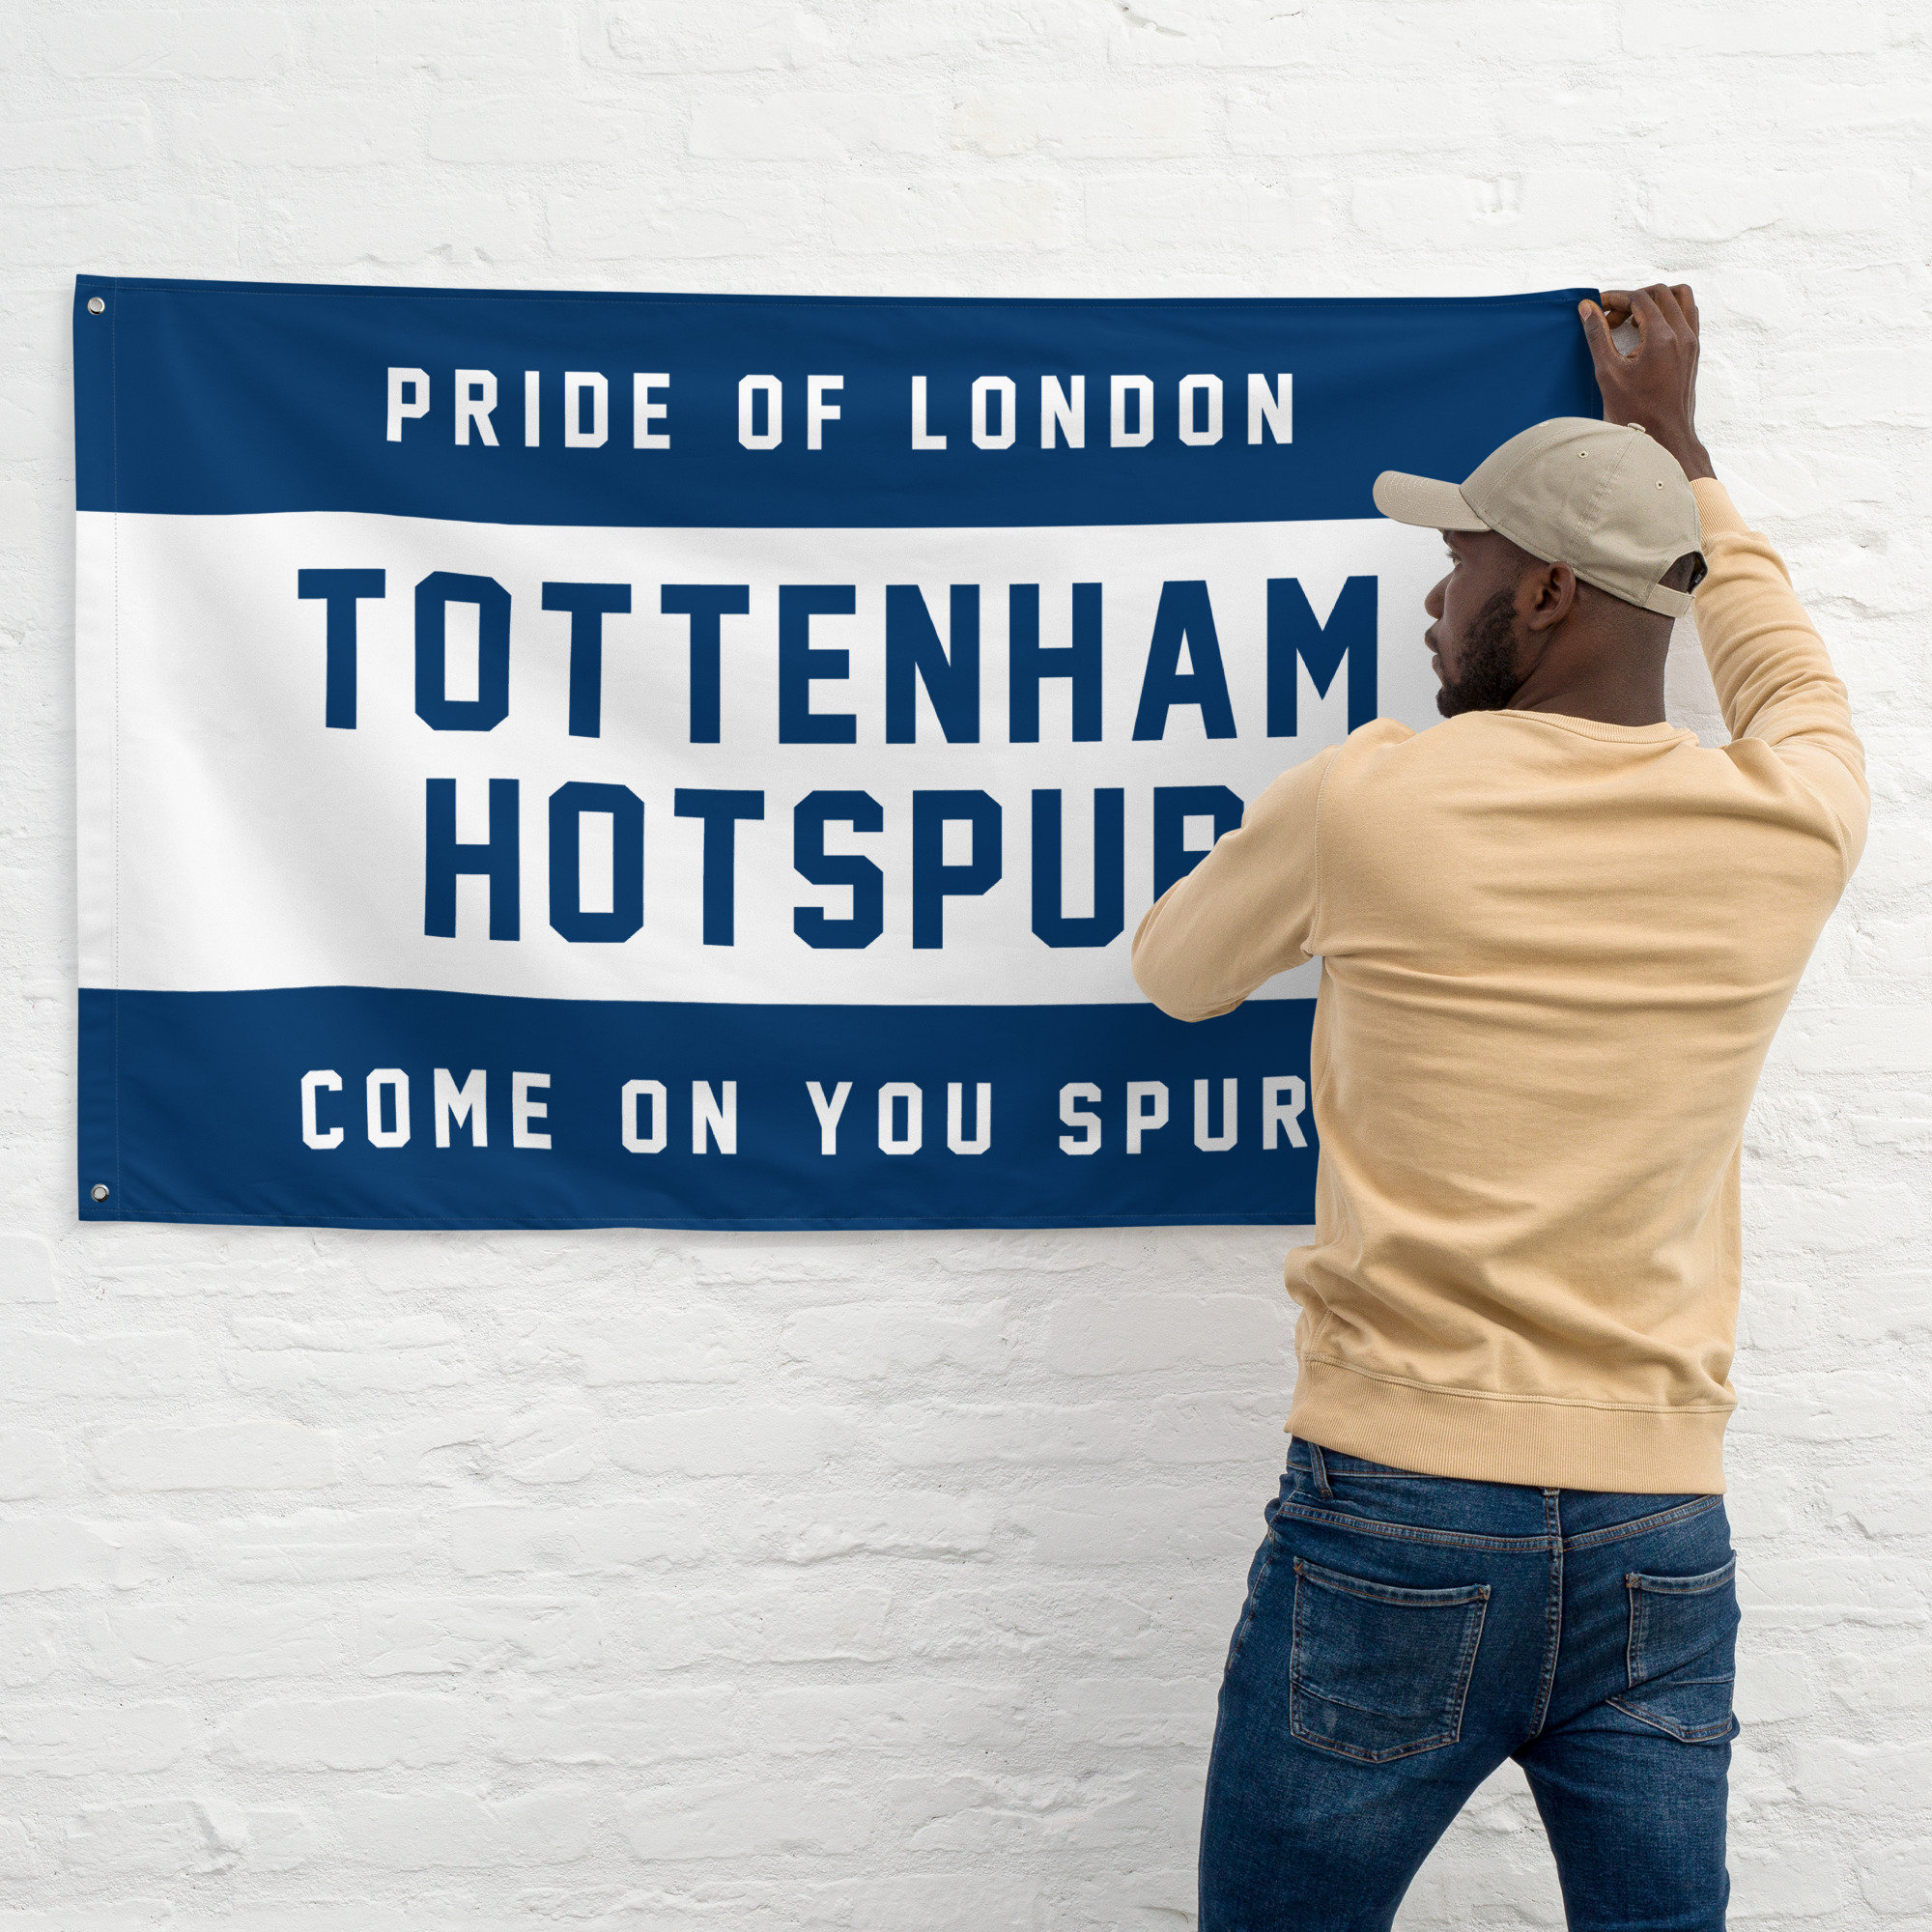 Tottenham Hotspur FC Birthday Banner Personalized Party Backdrop Decoration  60 x 44 Inches 